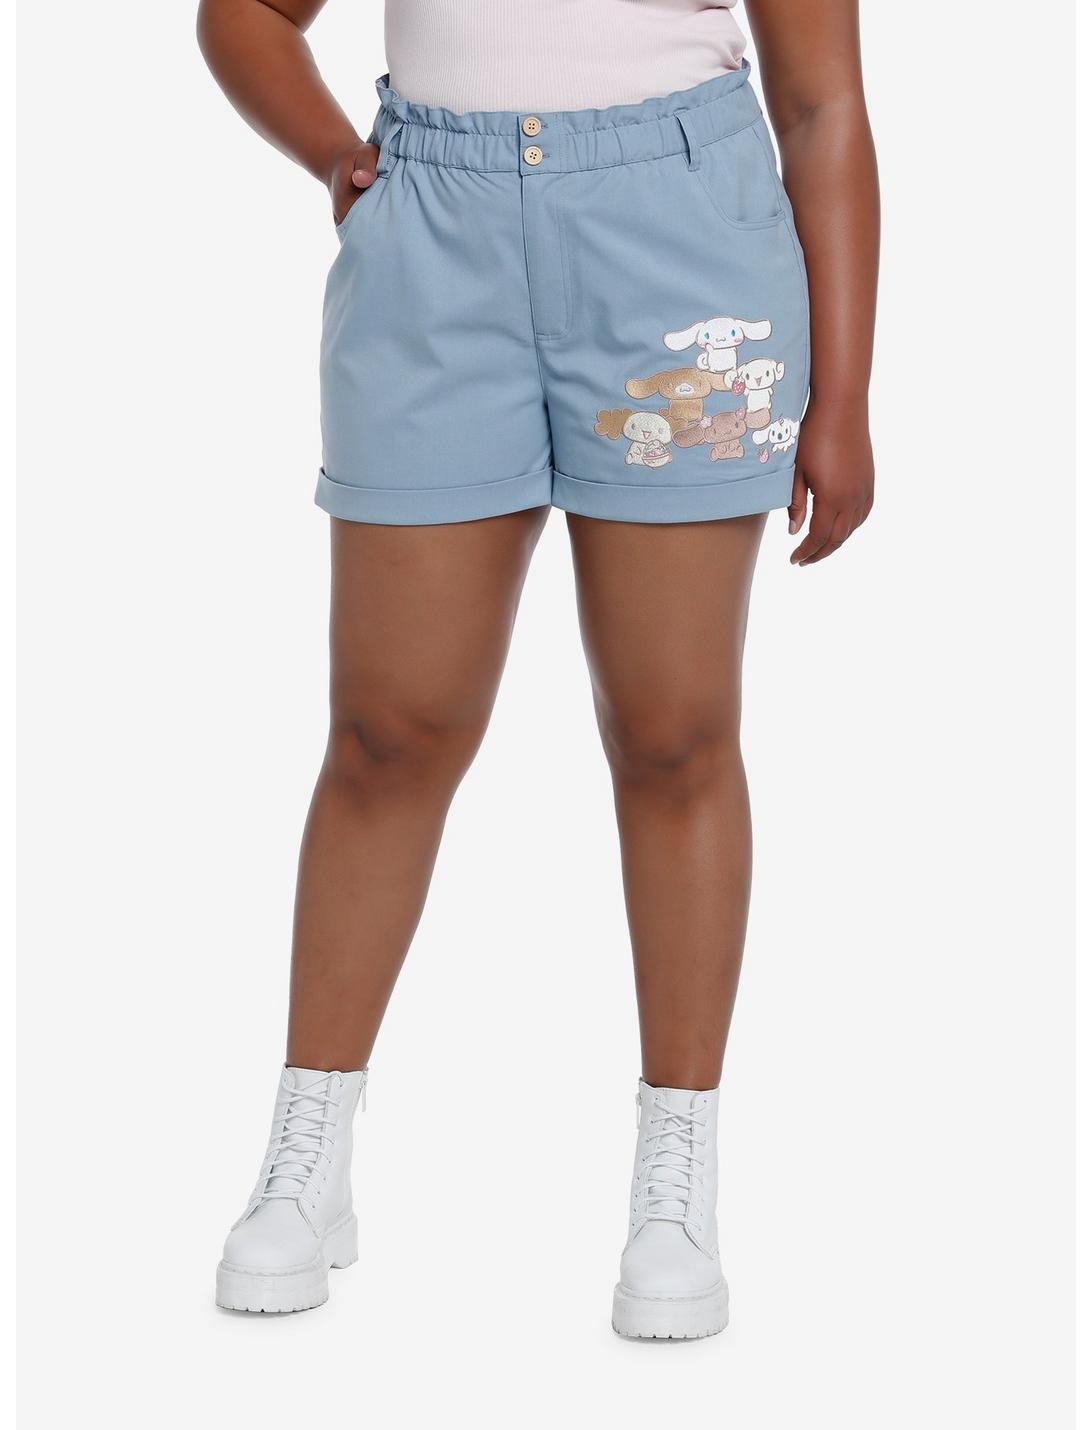 Cinnamoroll Family Paper Bag High-Waisted Shorts Plus Size, MULTI, hi-res